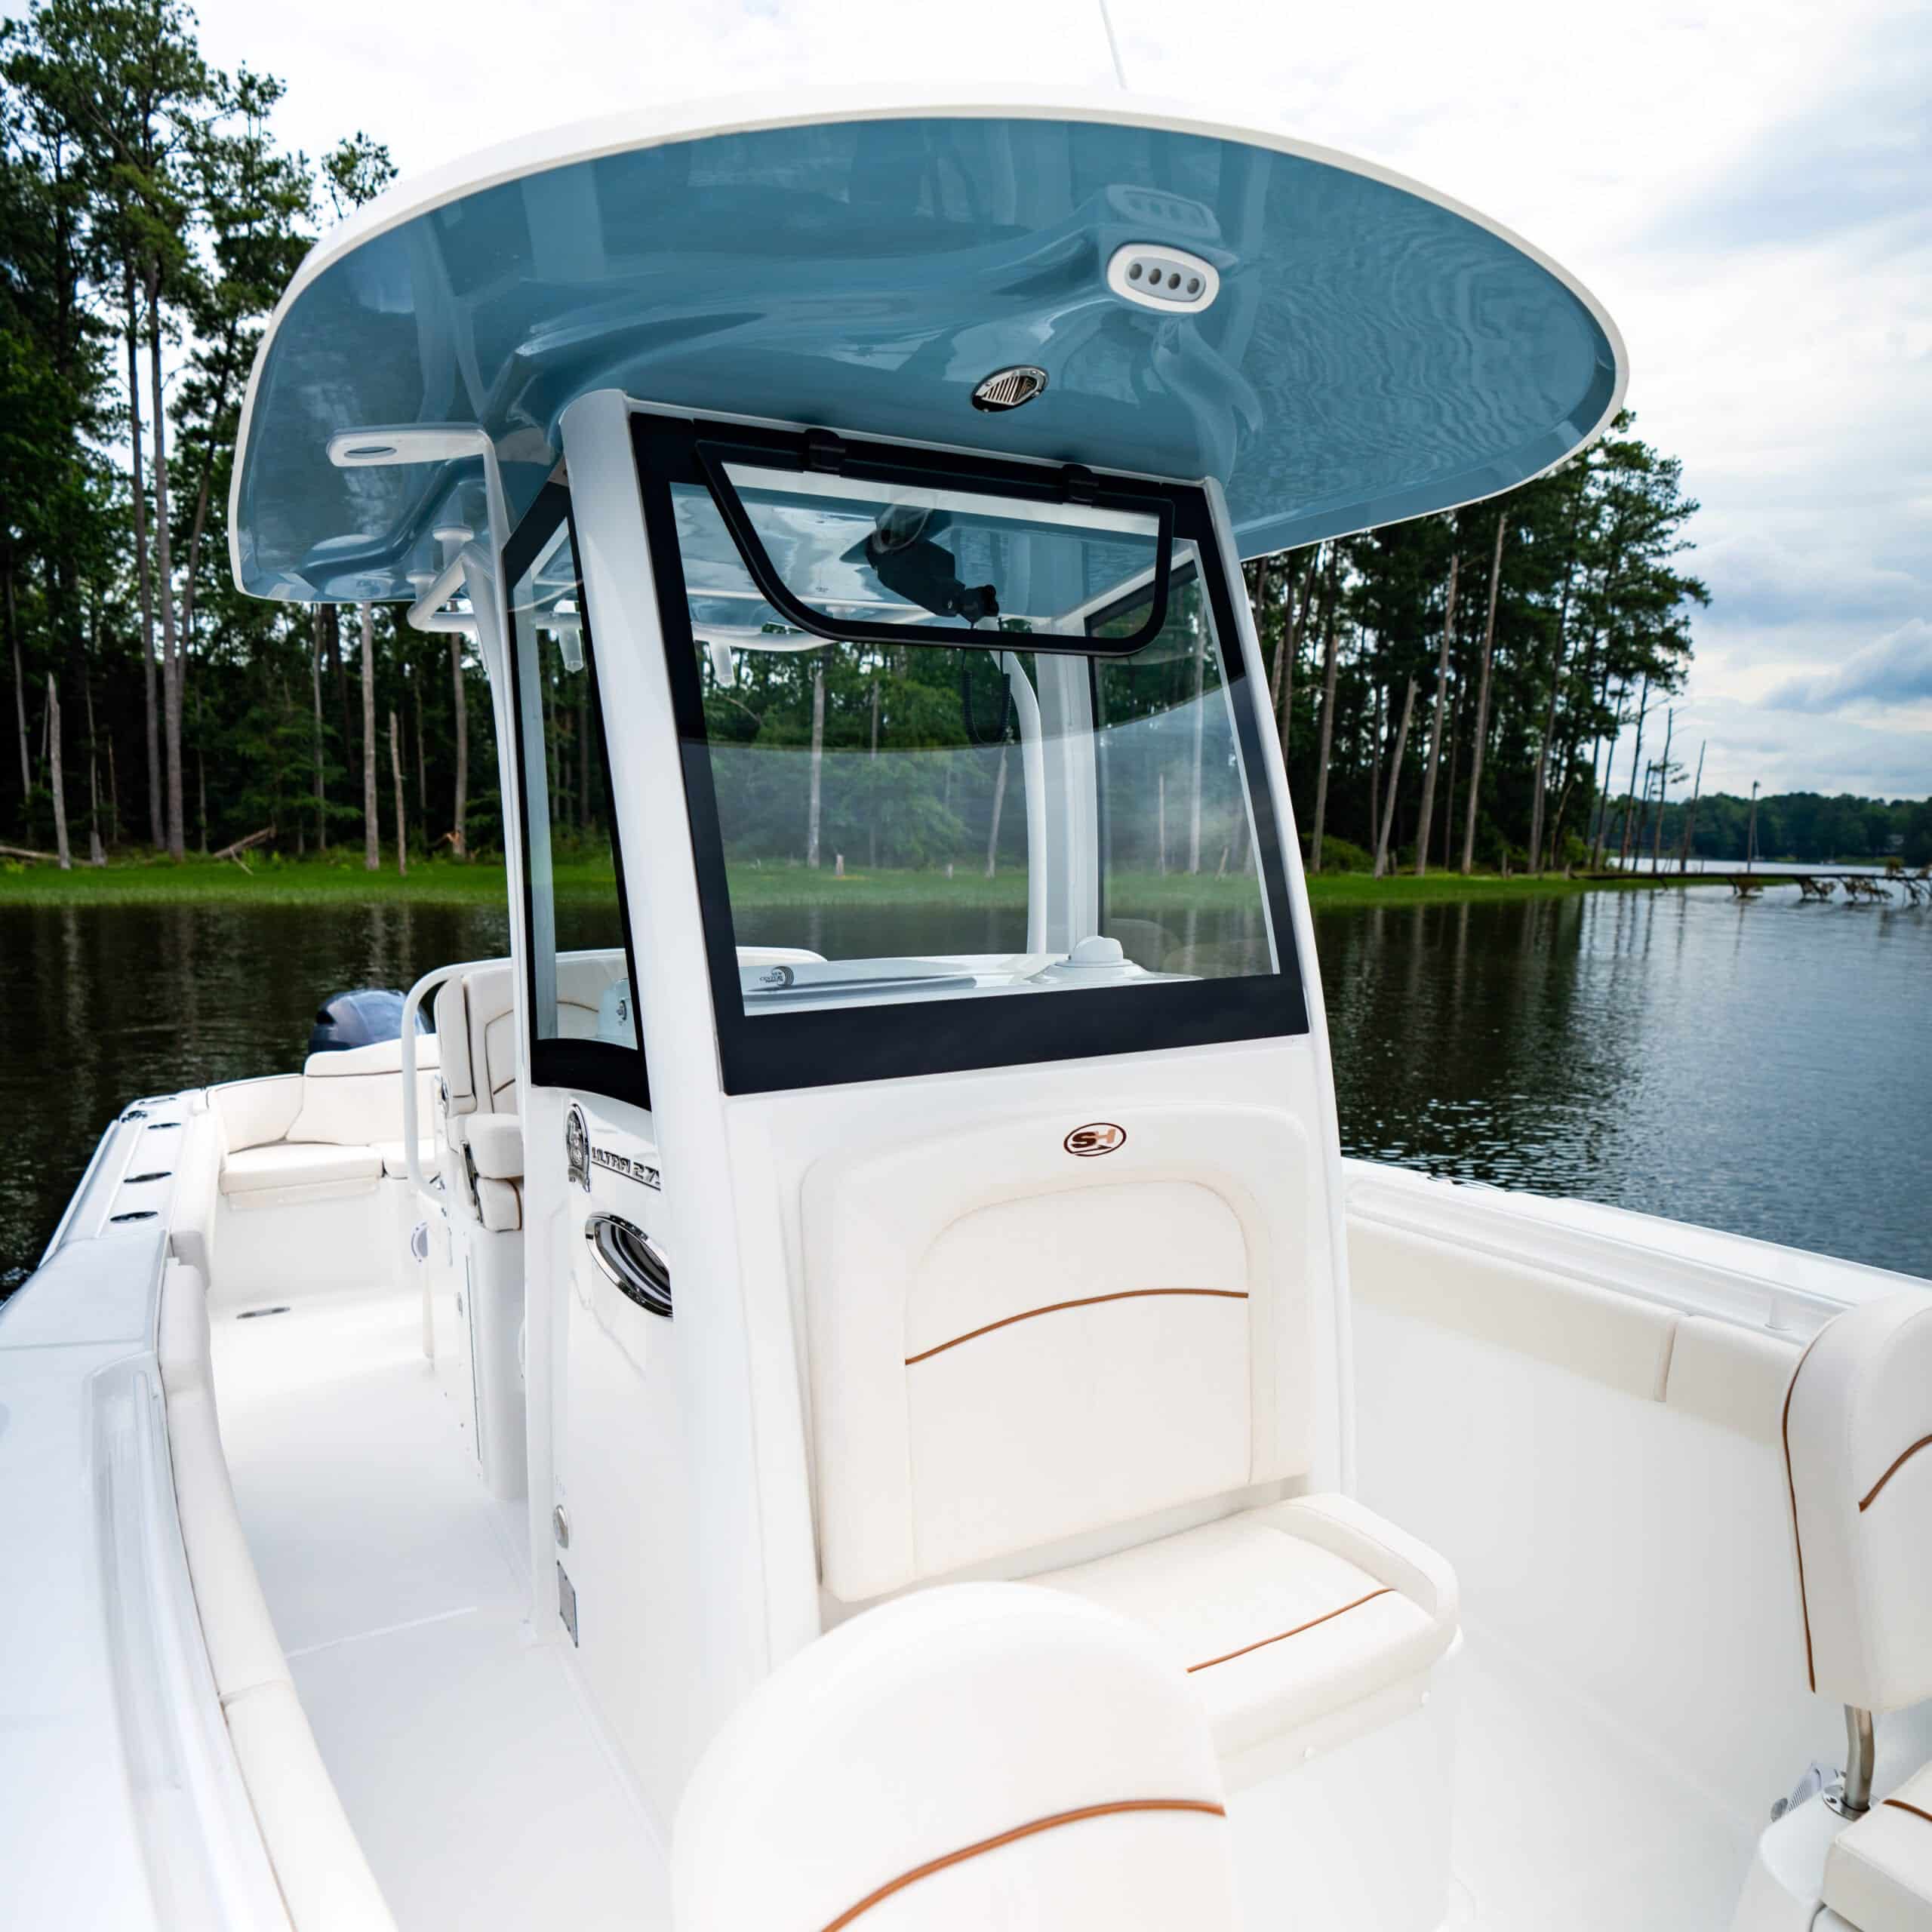 Fiberglass Boat Seat Boxes: Boost Your Fishing with Premium Quality